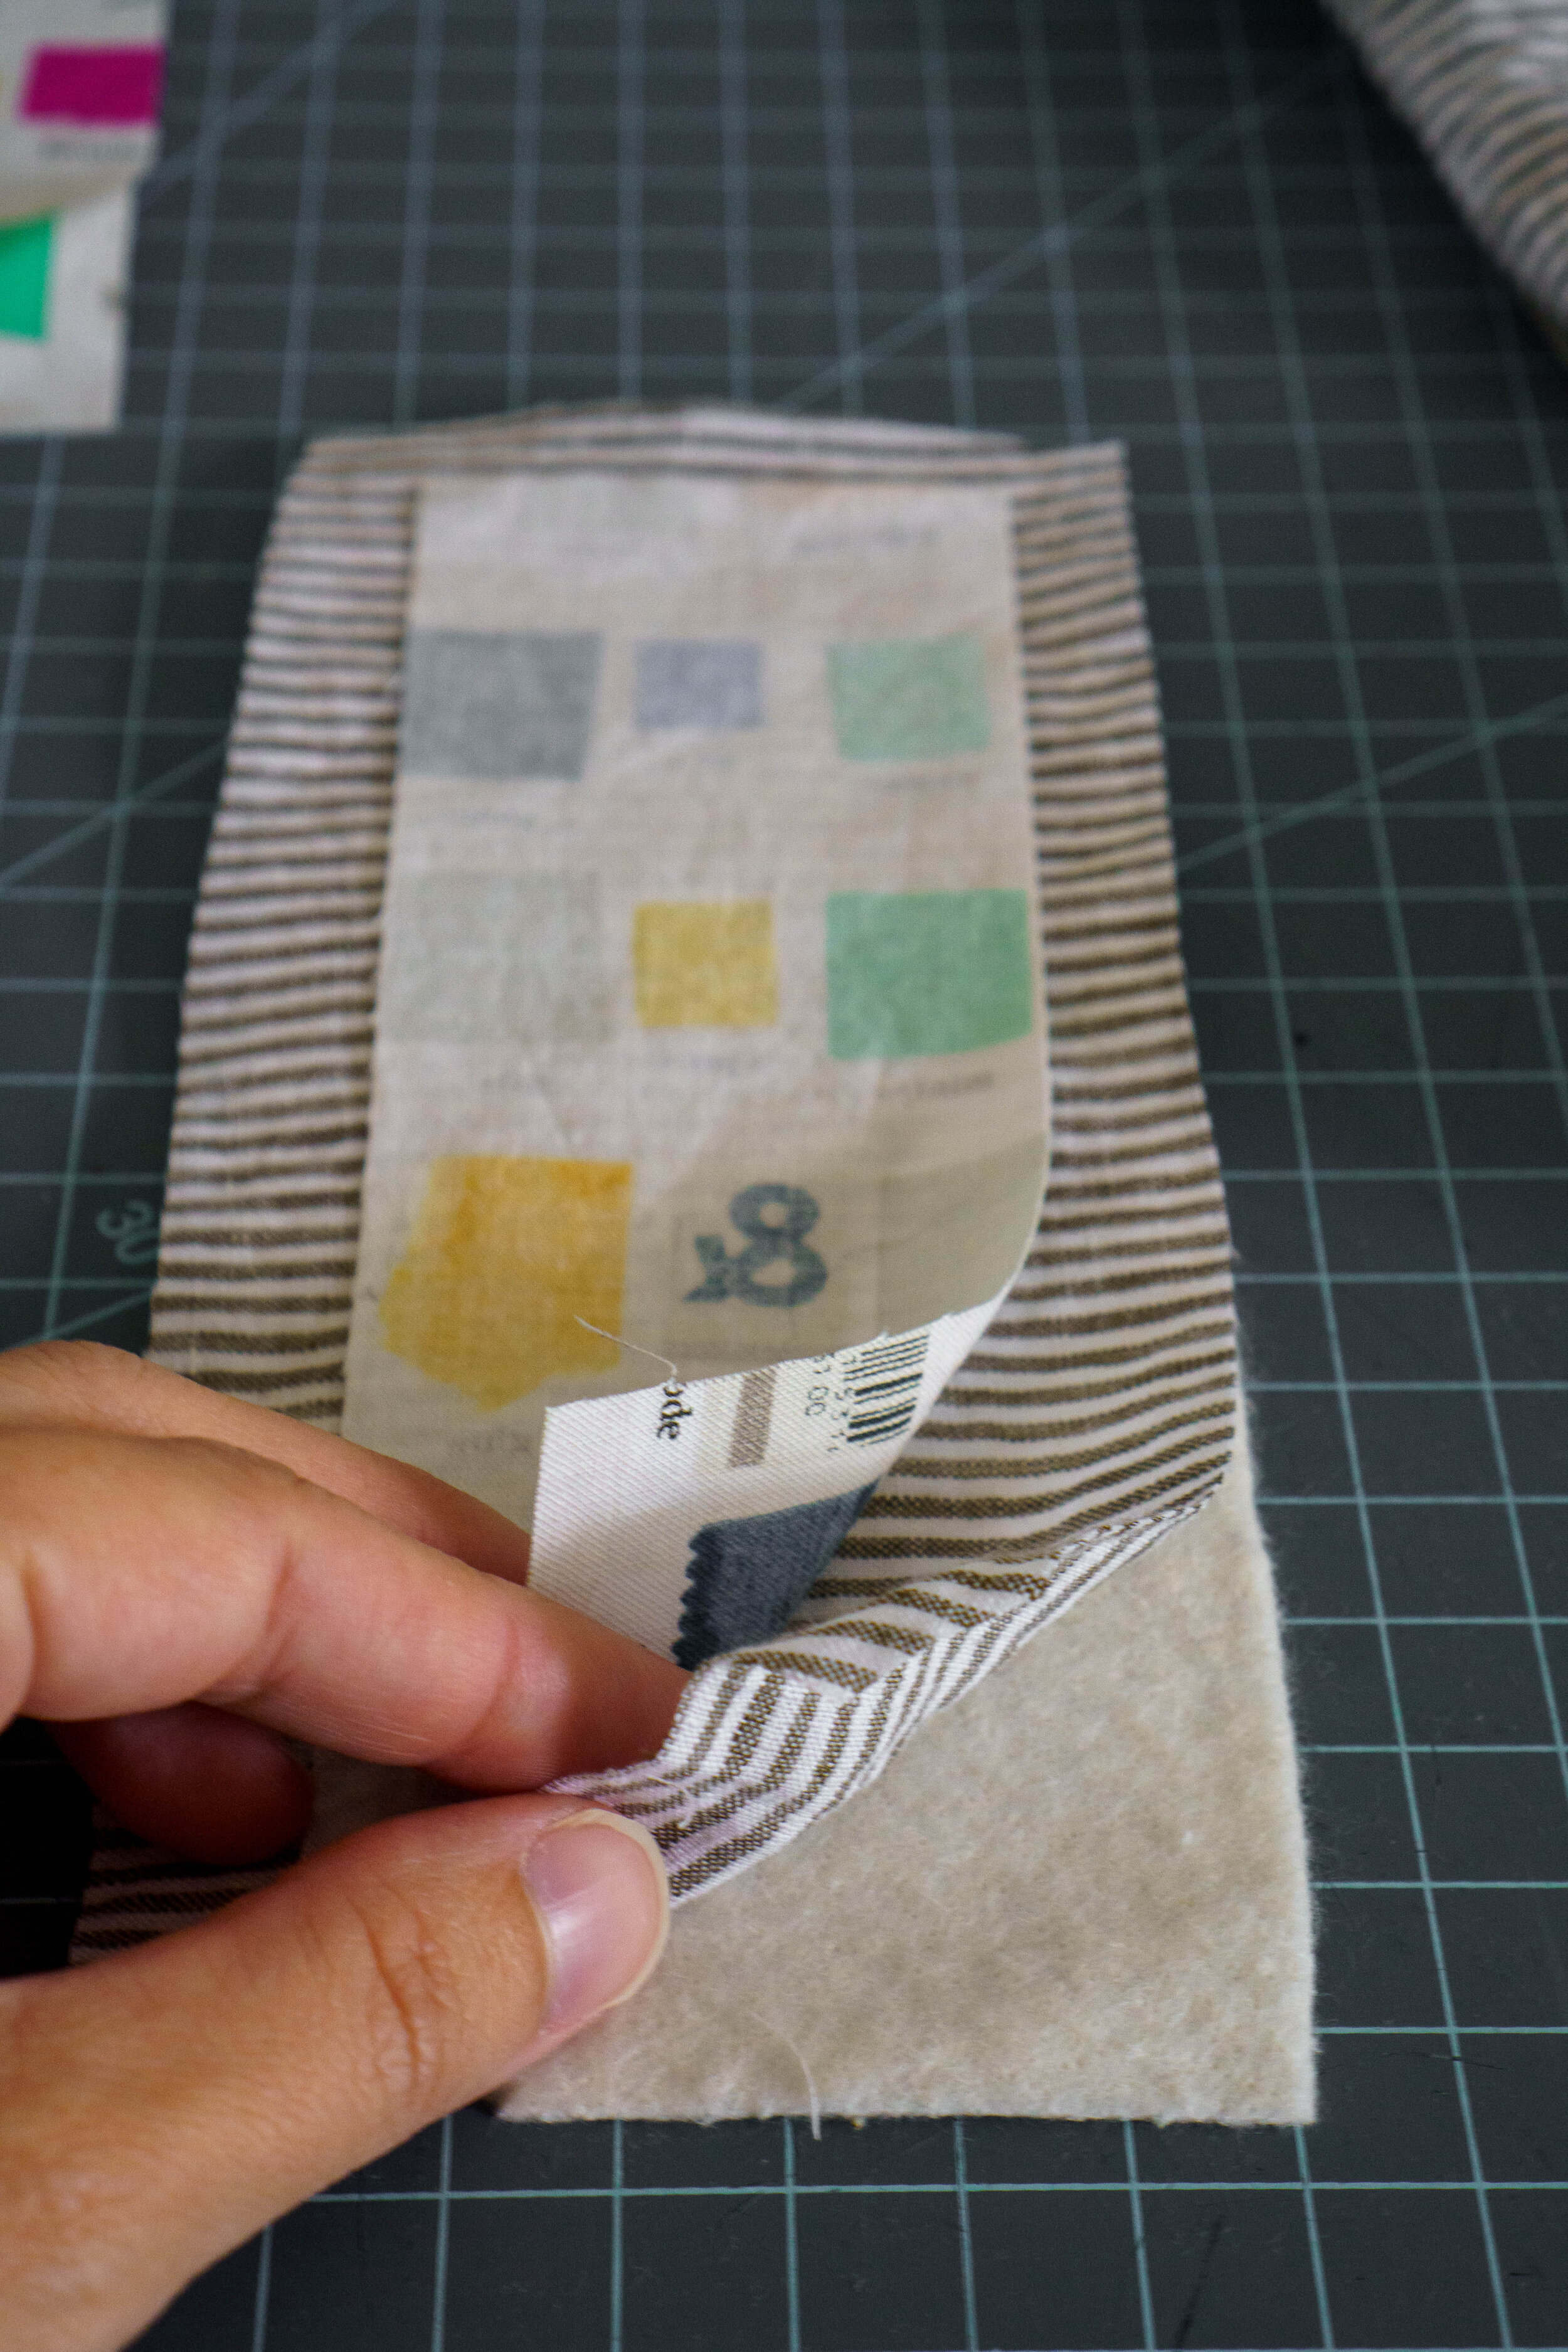 How to make quilted fabric 